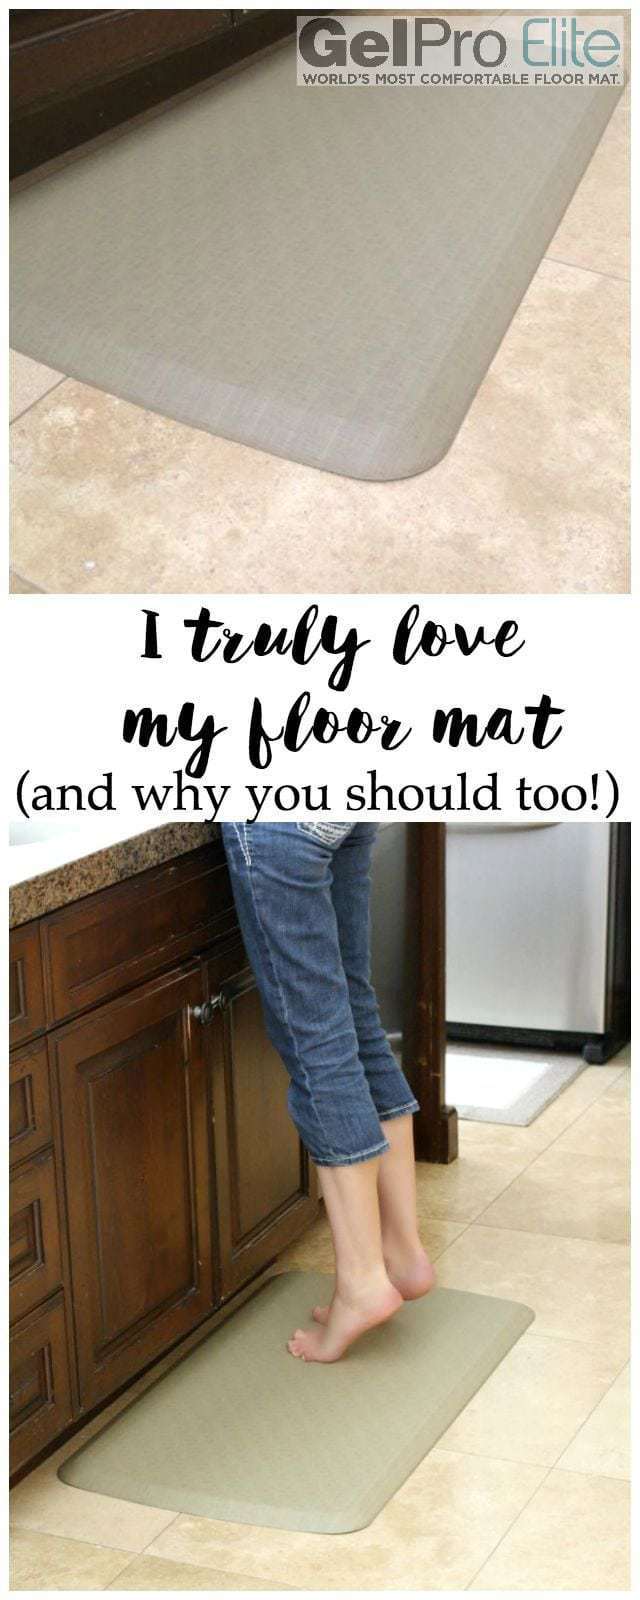 GelPro Floor Mat- Why I love mine and why you should try one!